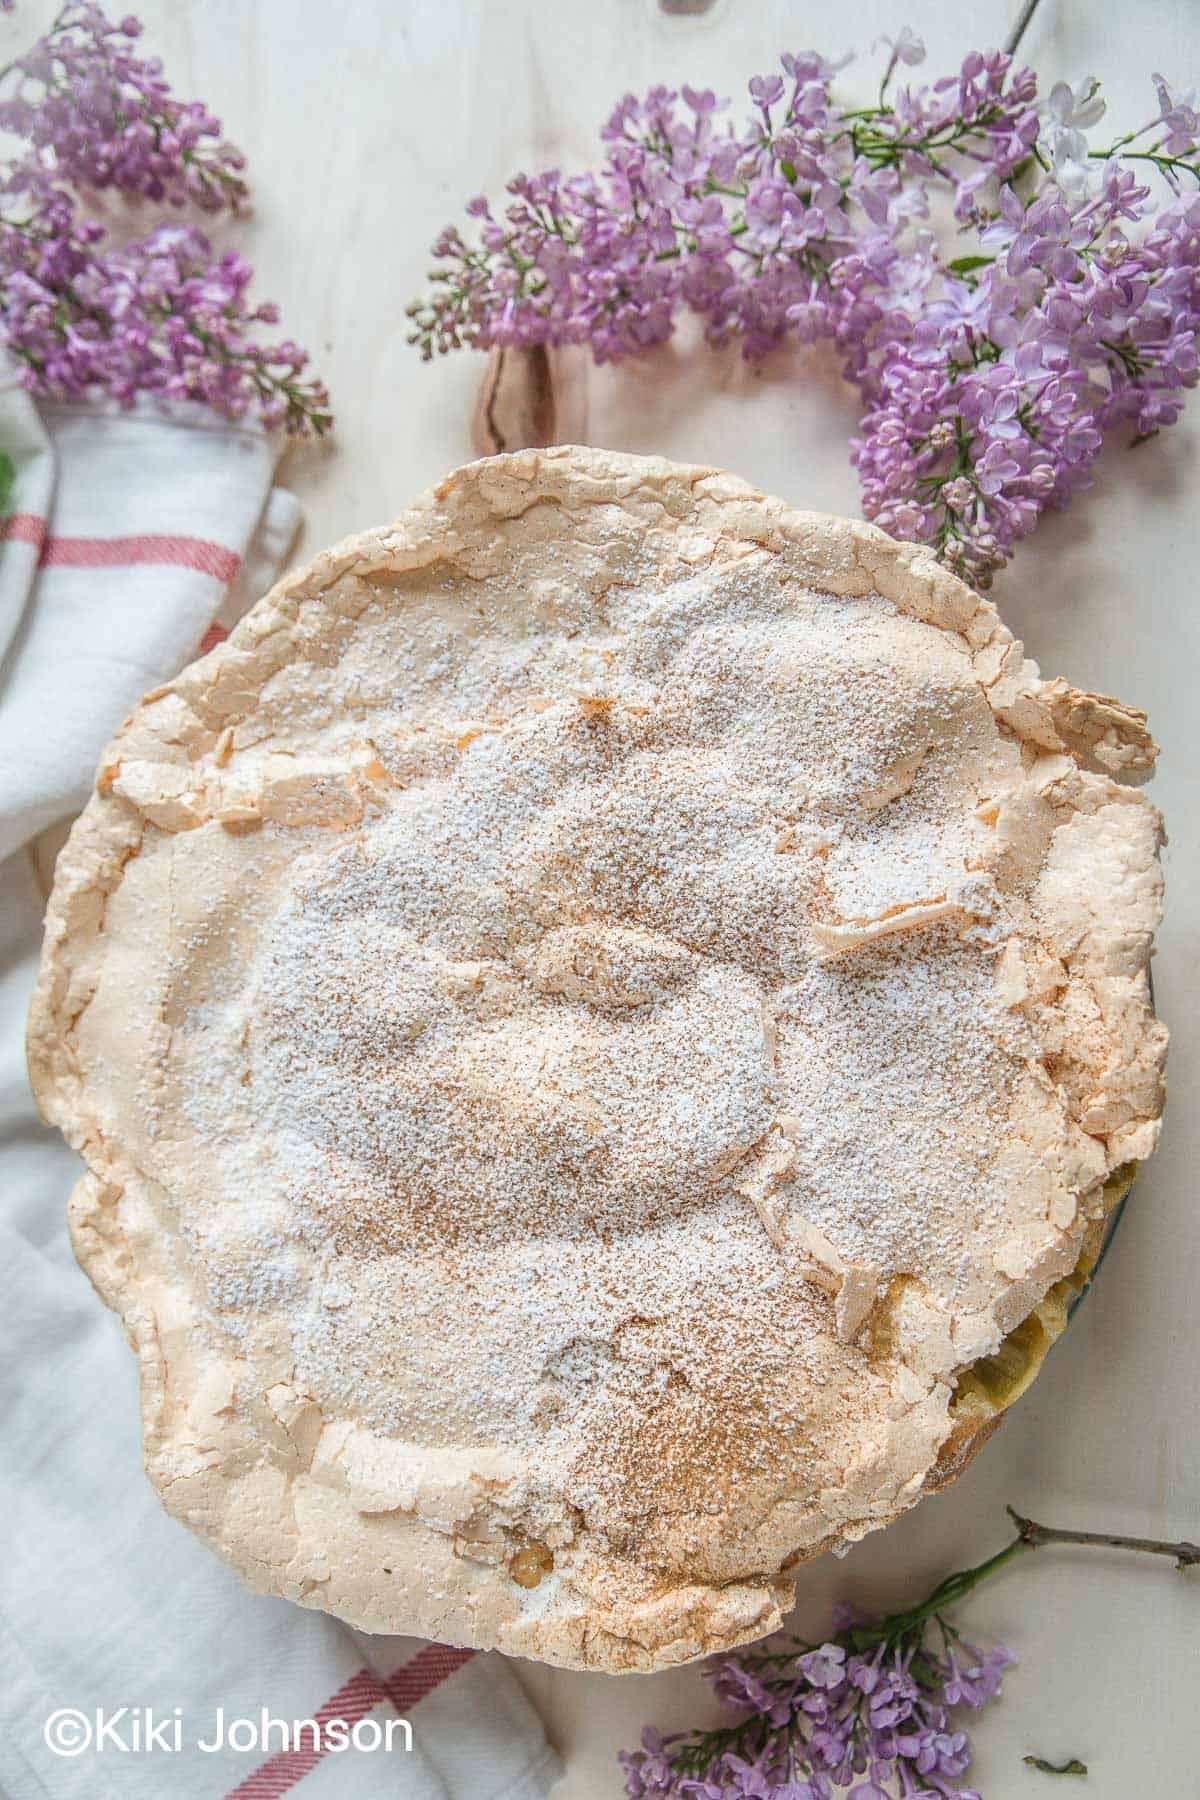 Traditional German Rhubarb Meringue Cake surrounded with lilac flowers